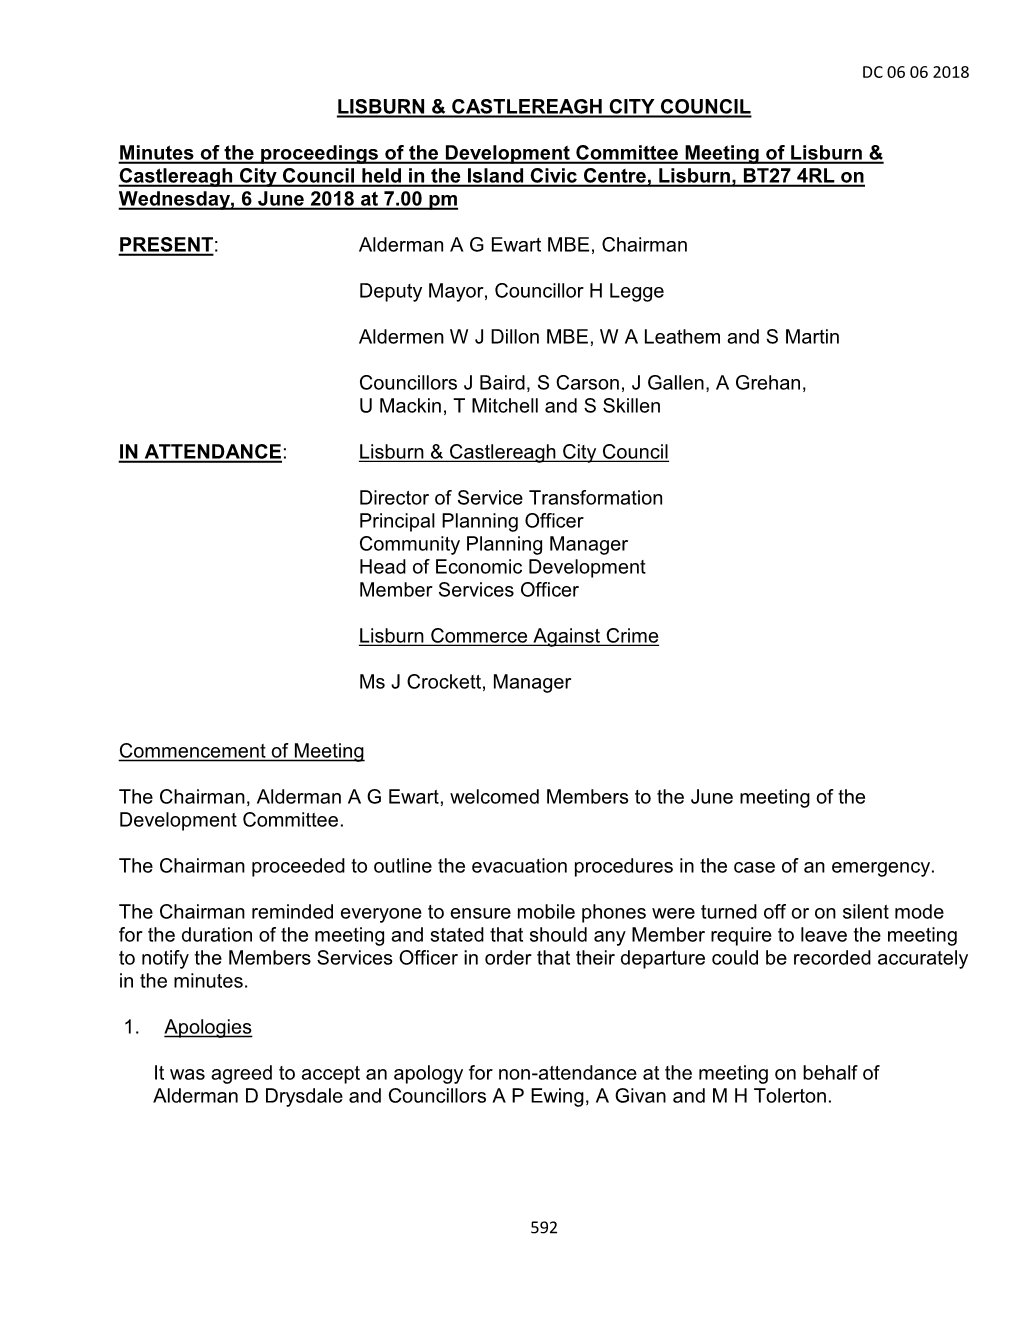 LISBURN & CASTLEREAGH CITY COUNCIL Minutes of The